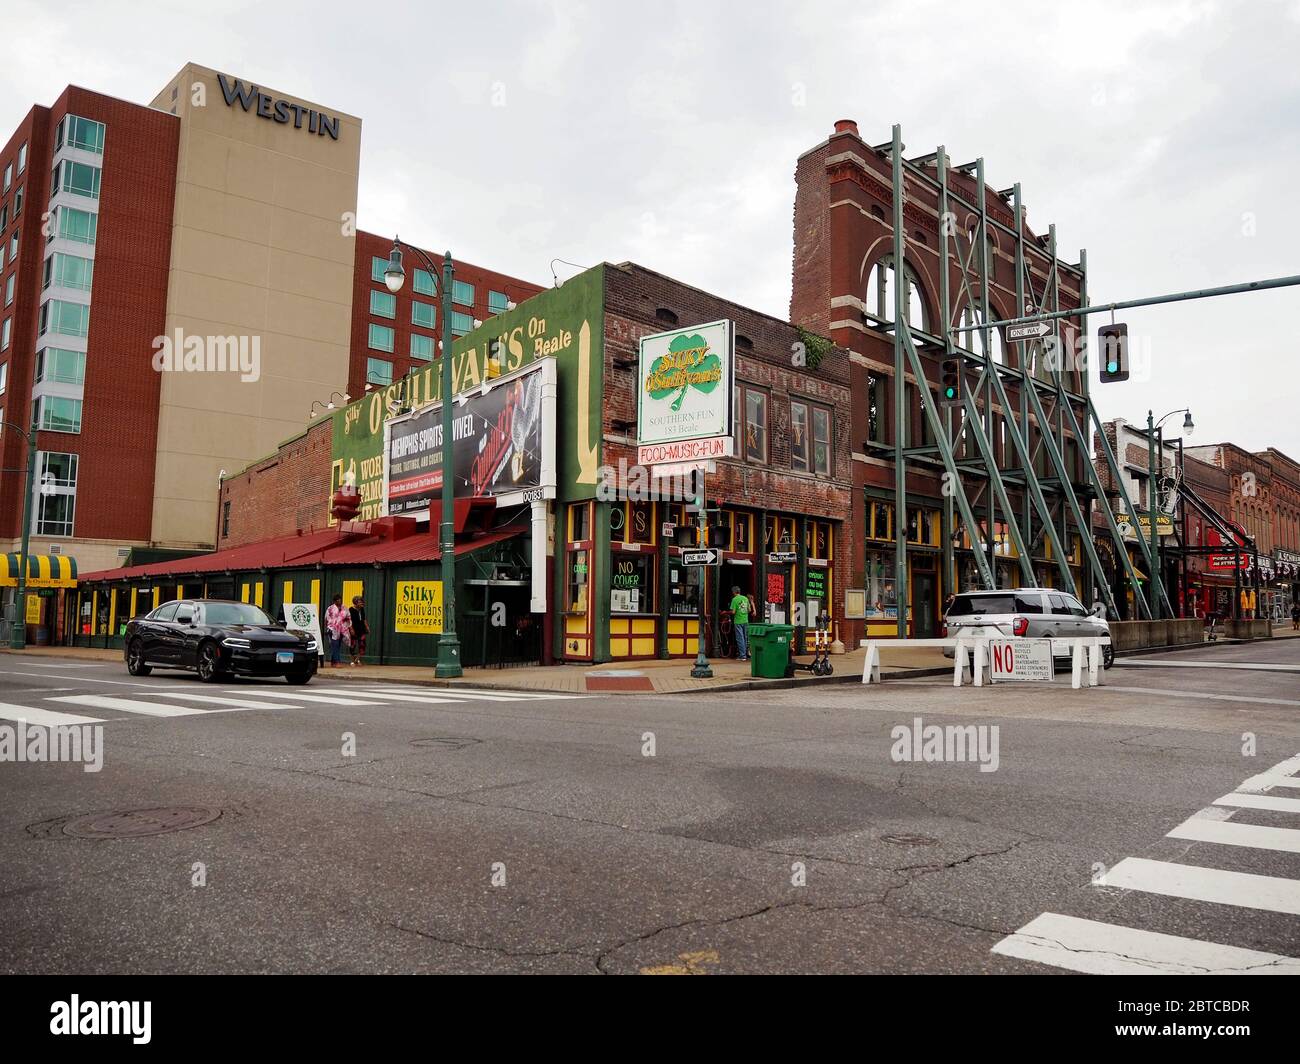 MEMPHIS, TENNESSEE - JULY 22, 2019: The Irish pub themed bar Silky O'Sullivan's operates out of a famous 100 year old building partiallly held togethe Stock Photo